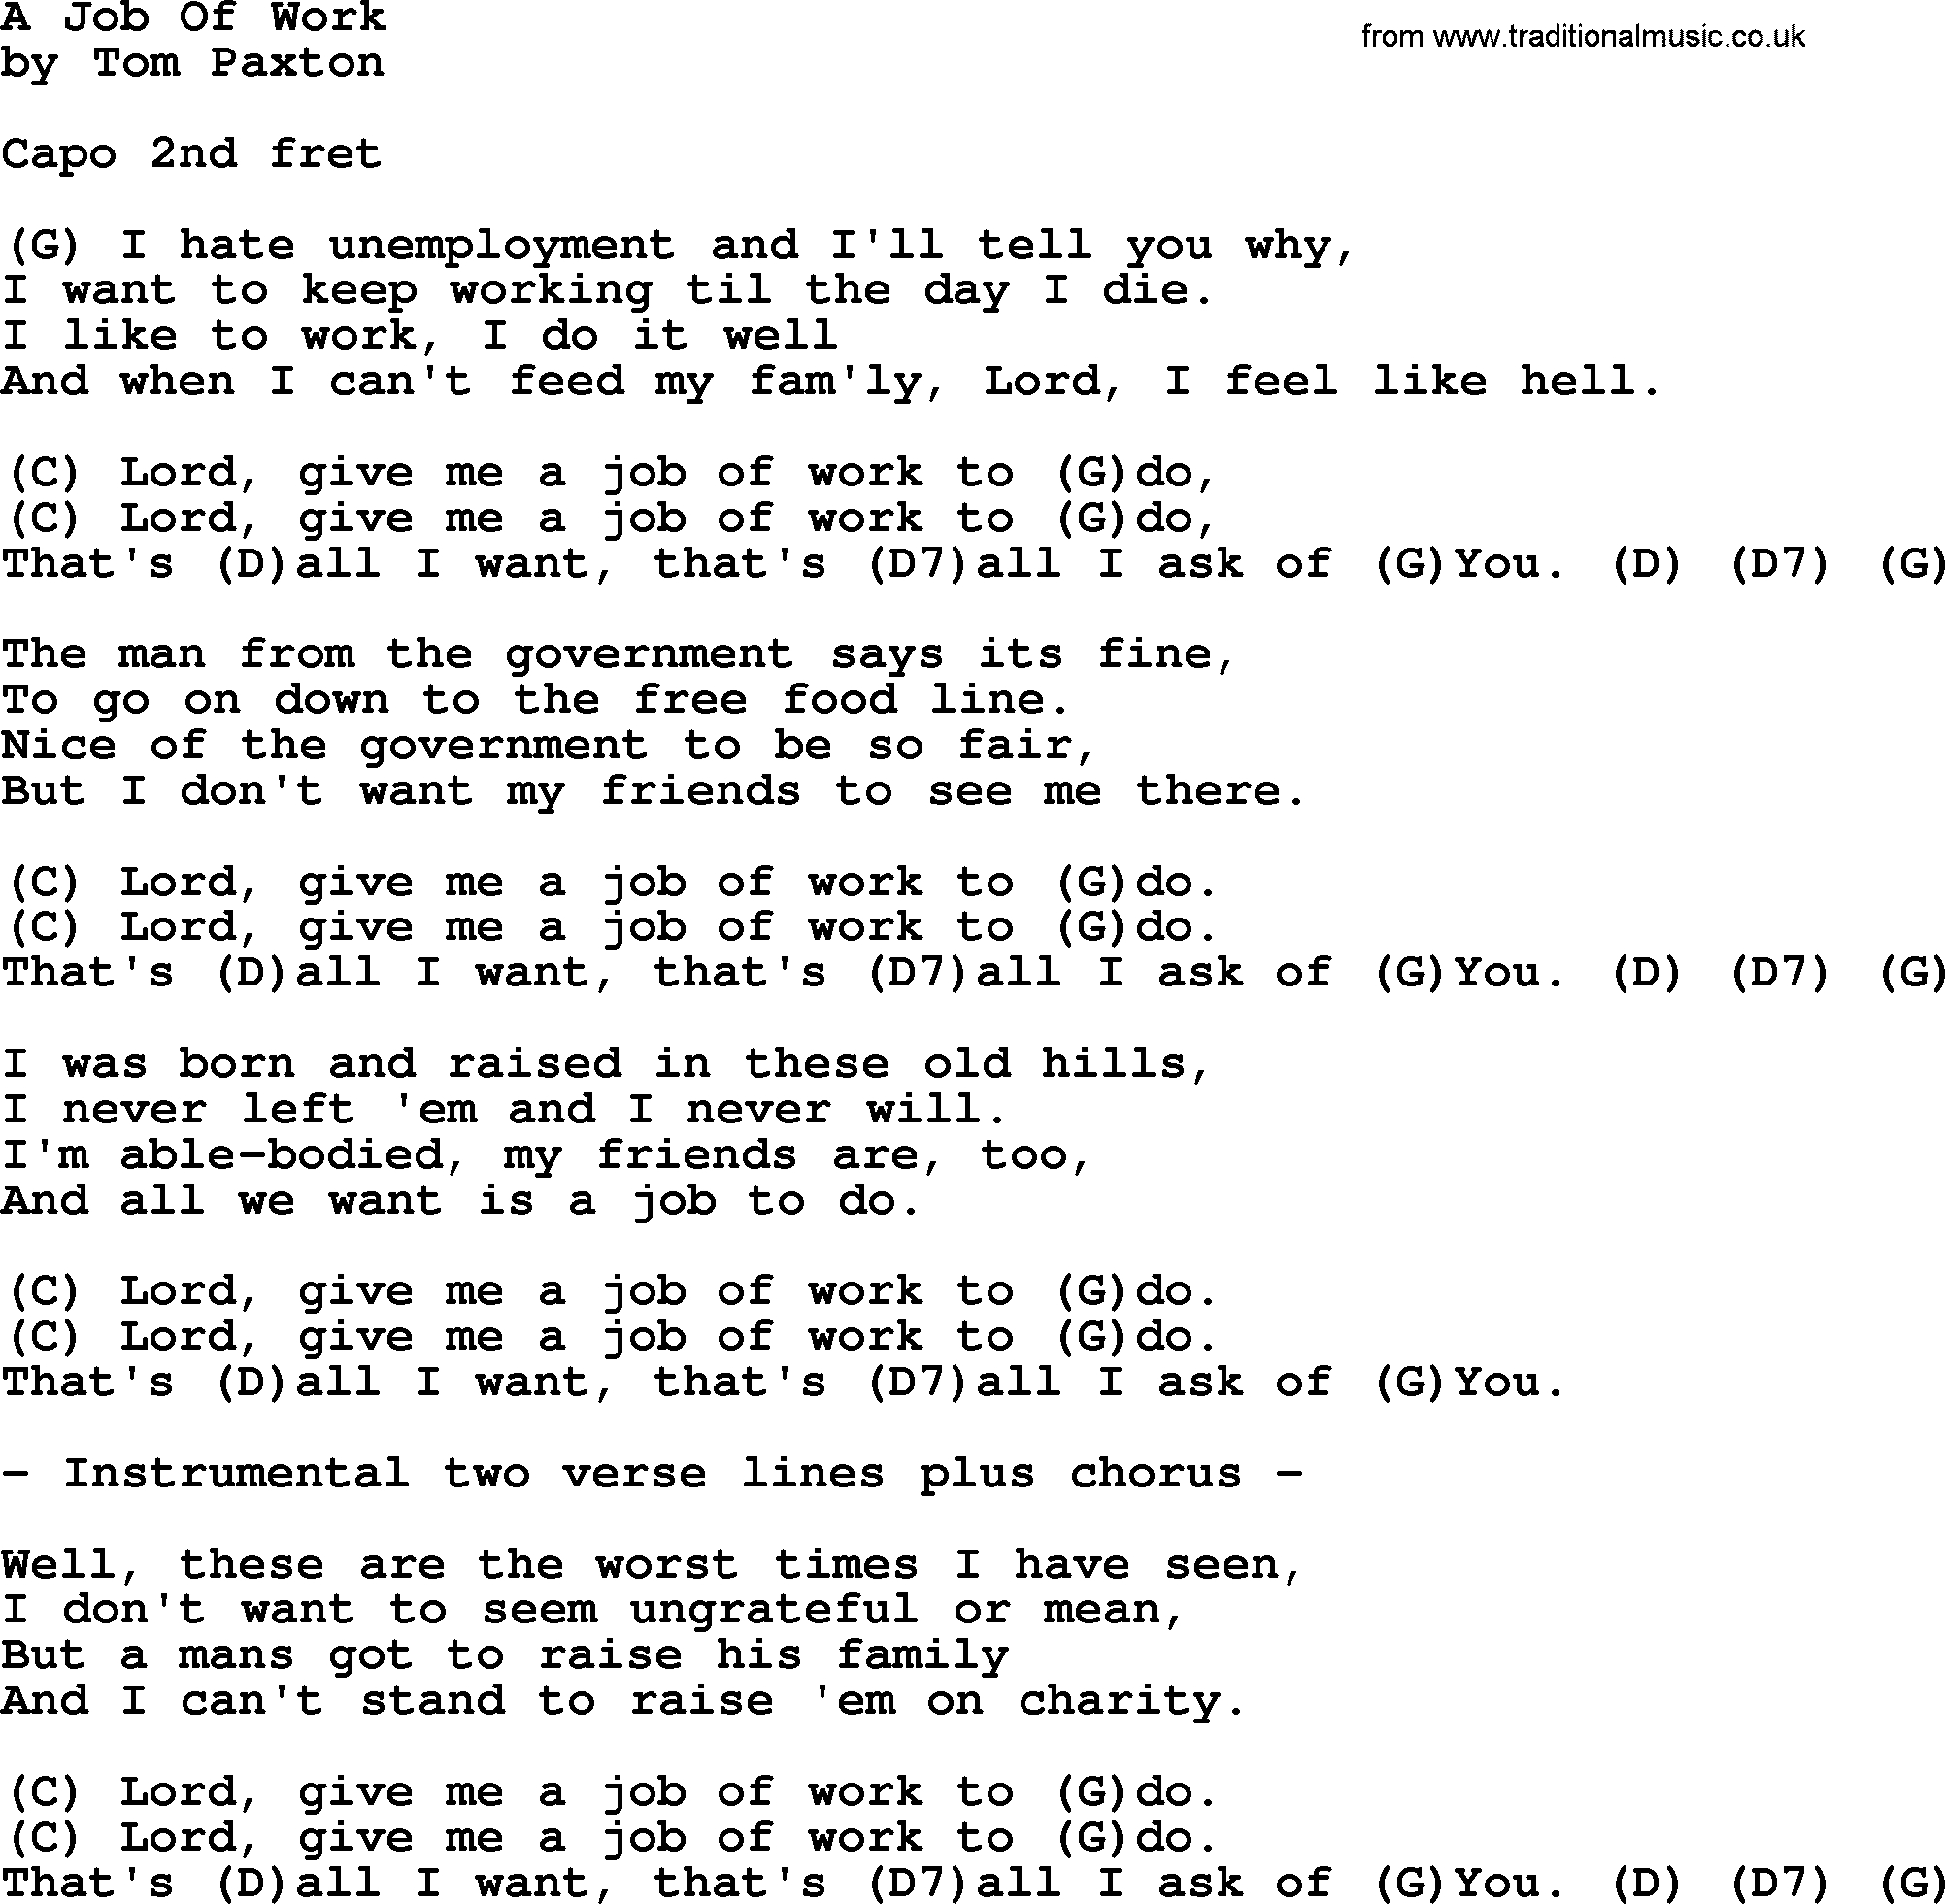 All I Ask Chords A Job Of Work Tom Paxton Lyrics And Chords